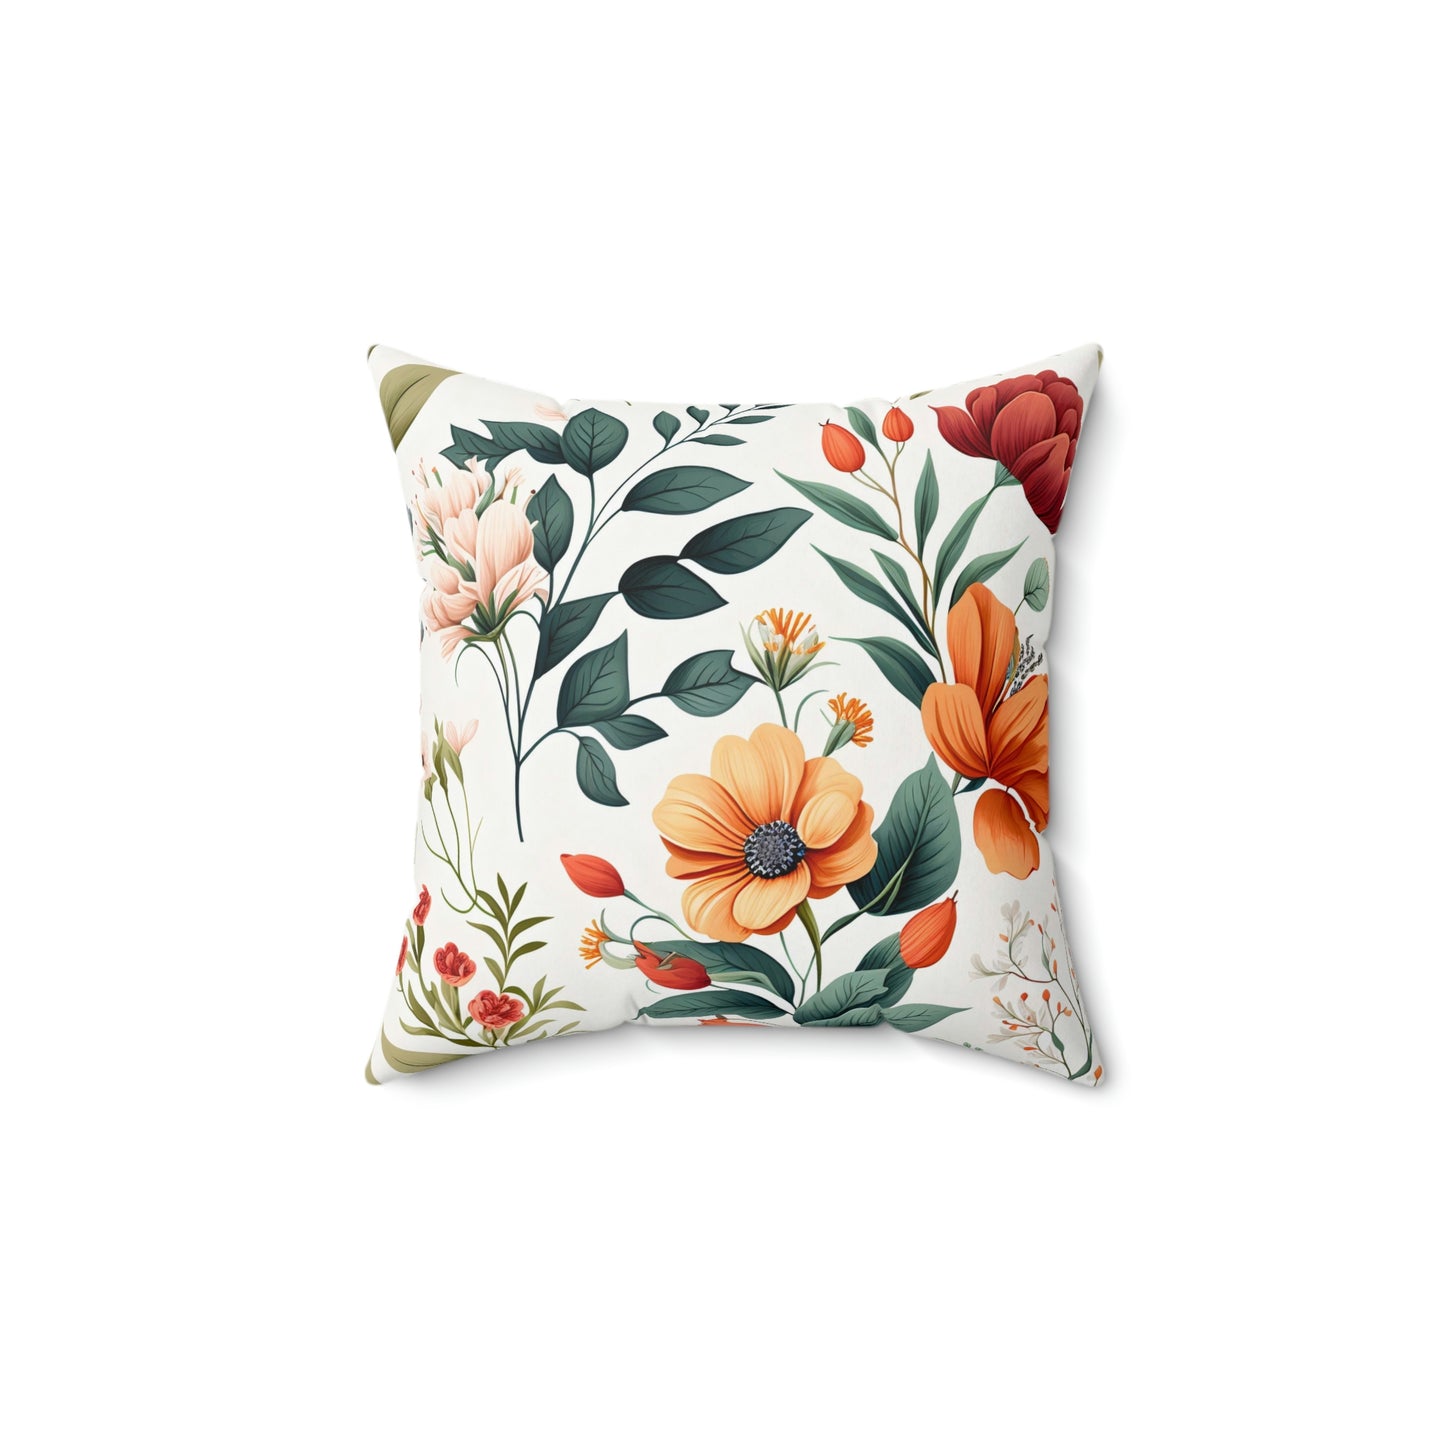 Red and orange floral accent throw pillow on a couch, Red and orange botanical couch pillow on a chair, Red and orange floral pattern pillow on a lounger, Red and orange spring garden floral decorative pillow on a bed